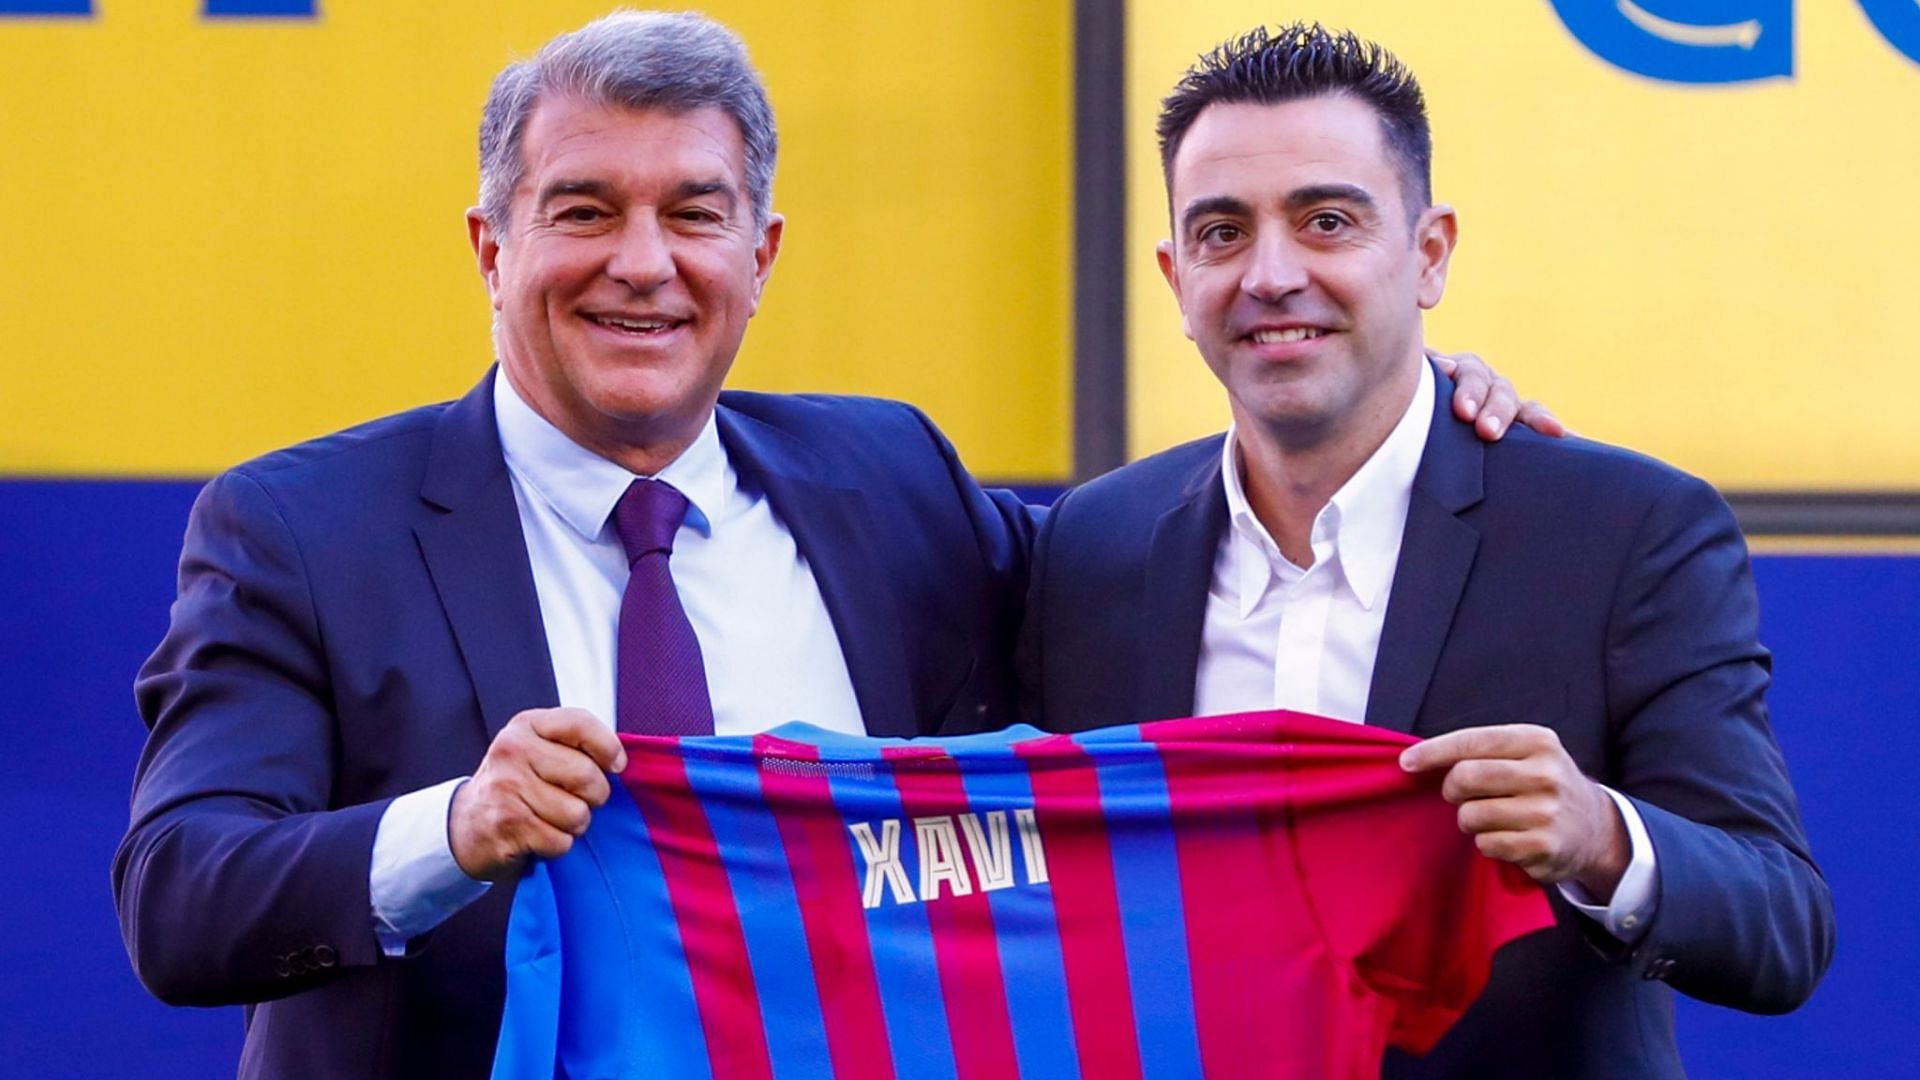 FC Barcelona recently appointed former player Xavi as the manager to take the club back to the top.